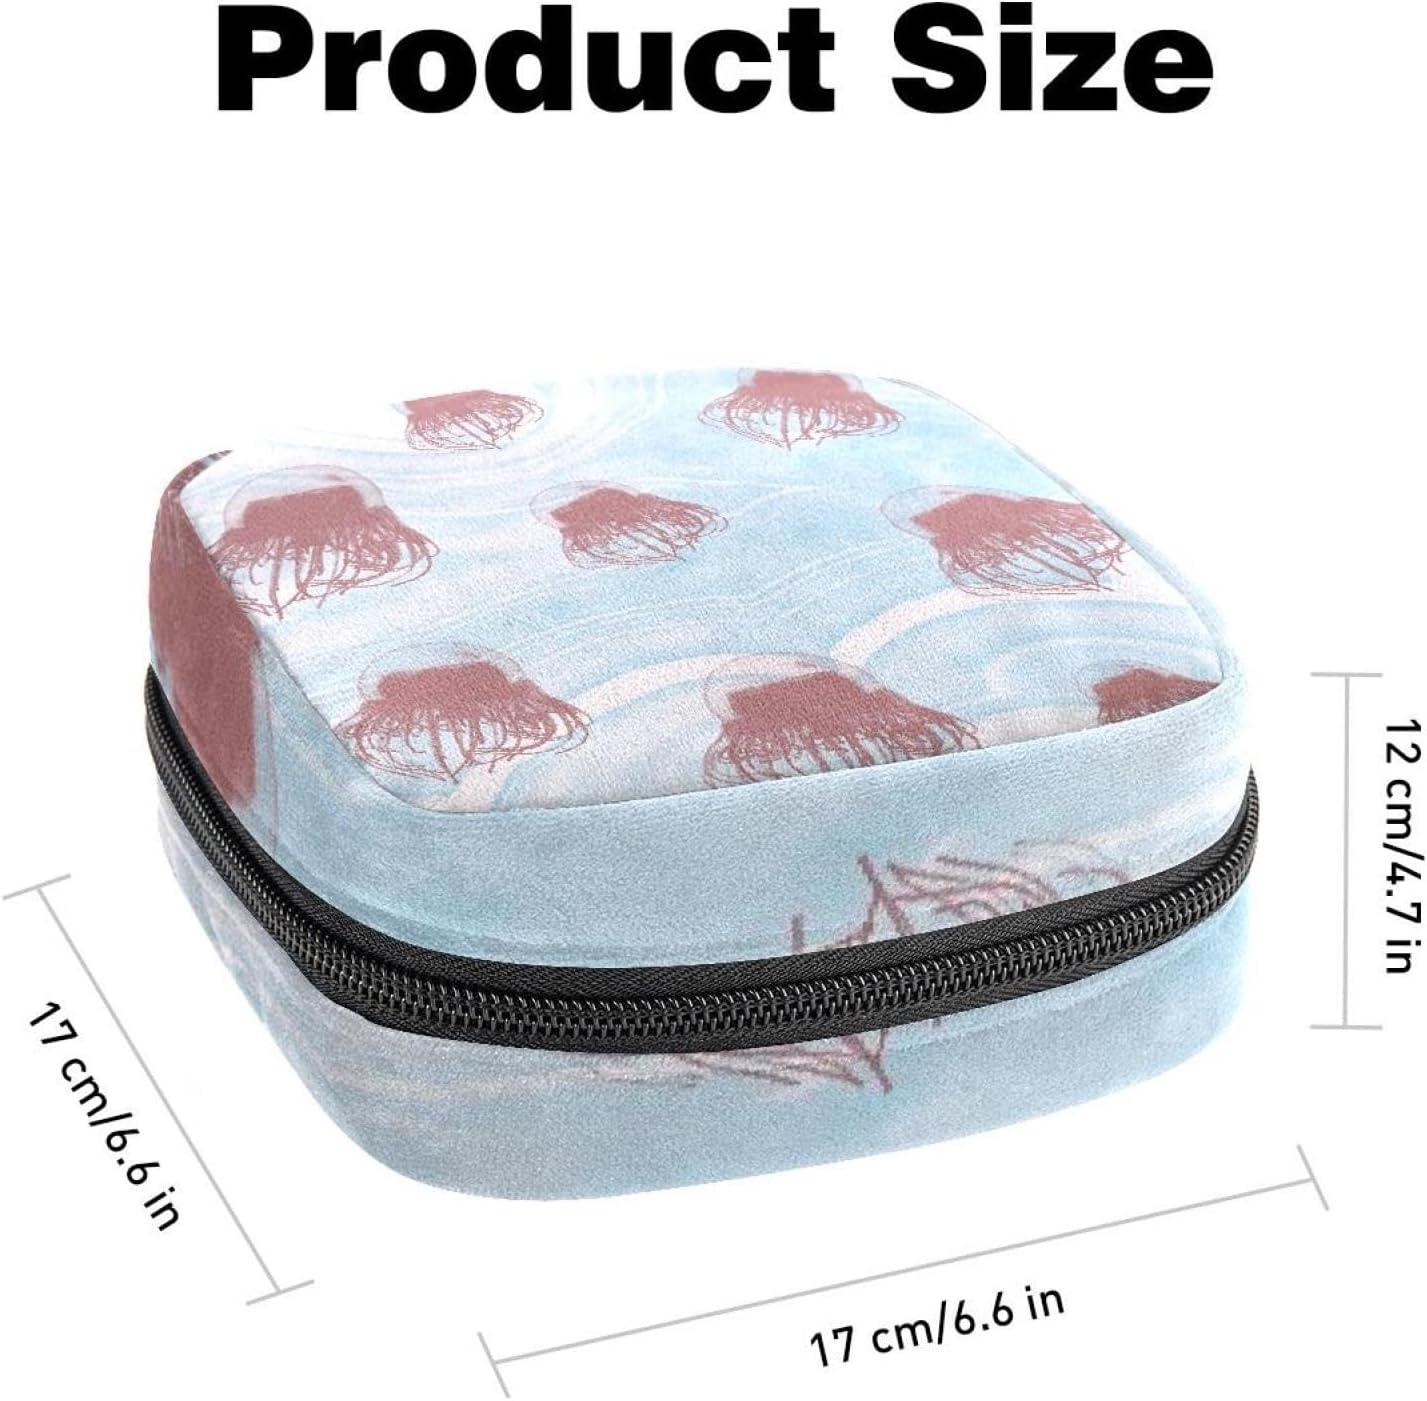  Period Pouch Portable Tampon Storage Bag,Tampon Holder for Purse  Feminine Product Organizer,Fire Water Consuming Love : Health & Household